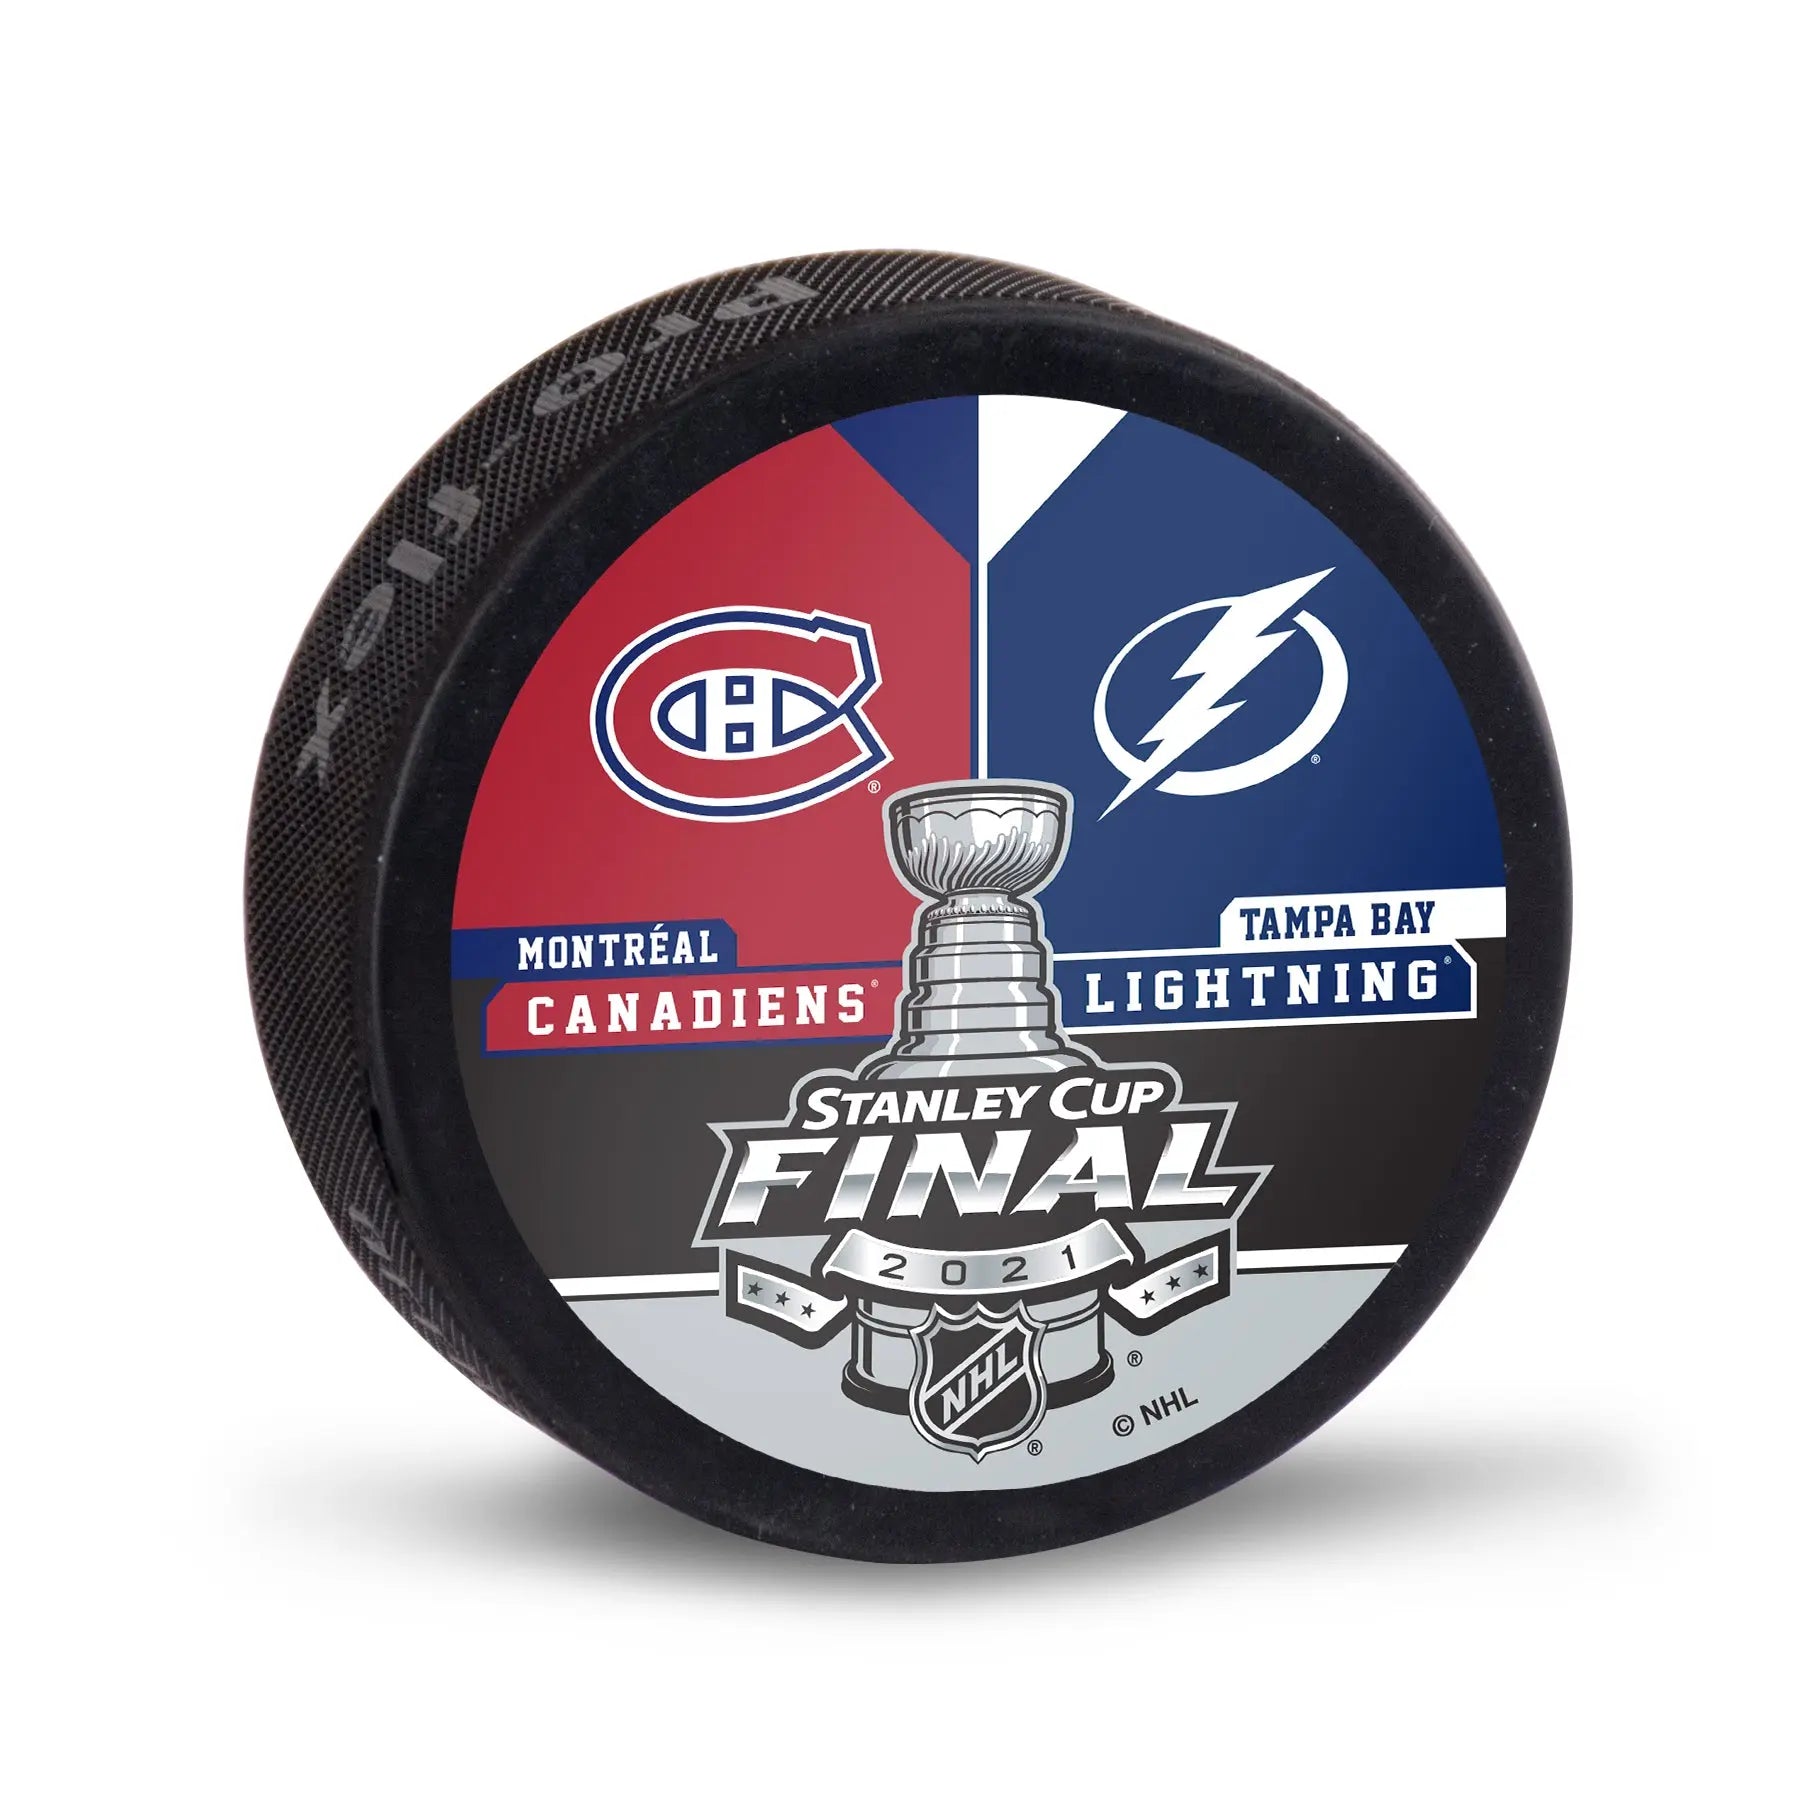 NHL Montreal Canadiens Vs Tampa Bay Lightning 2021 Stanley Cup